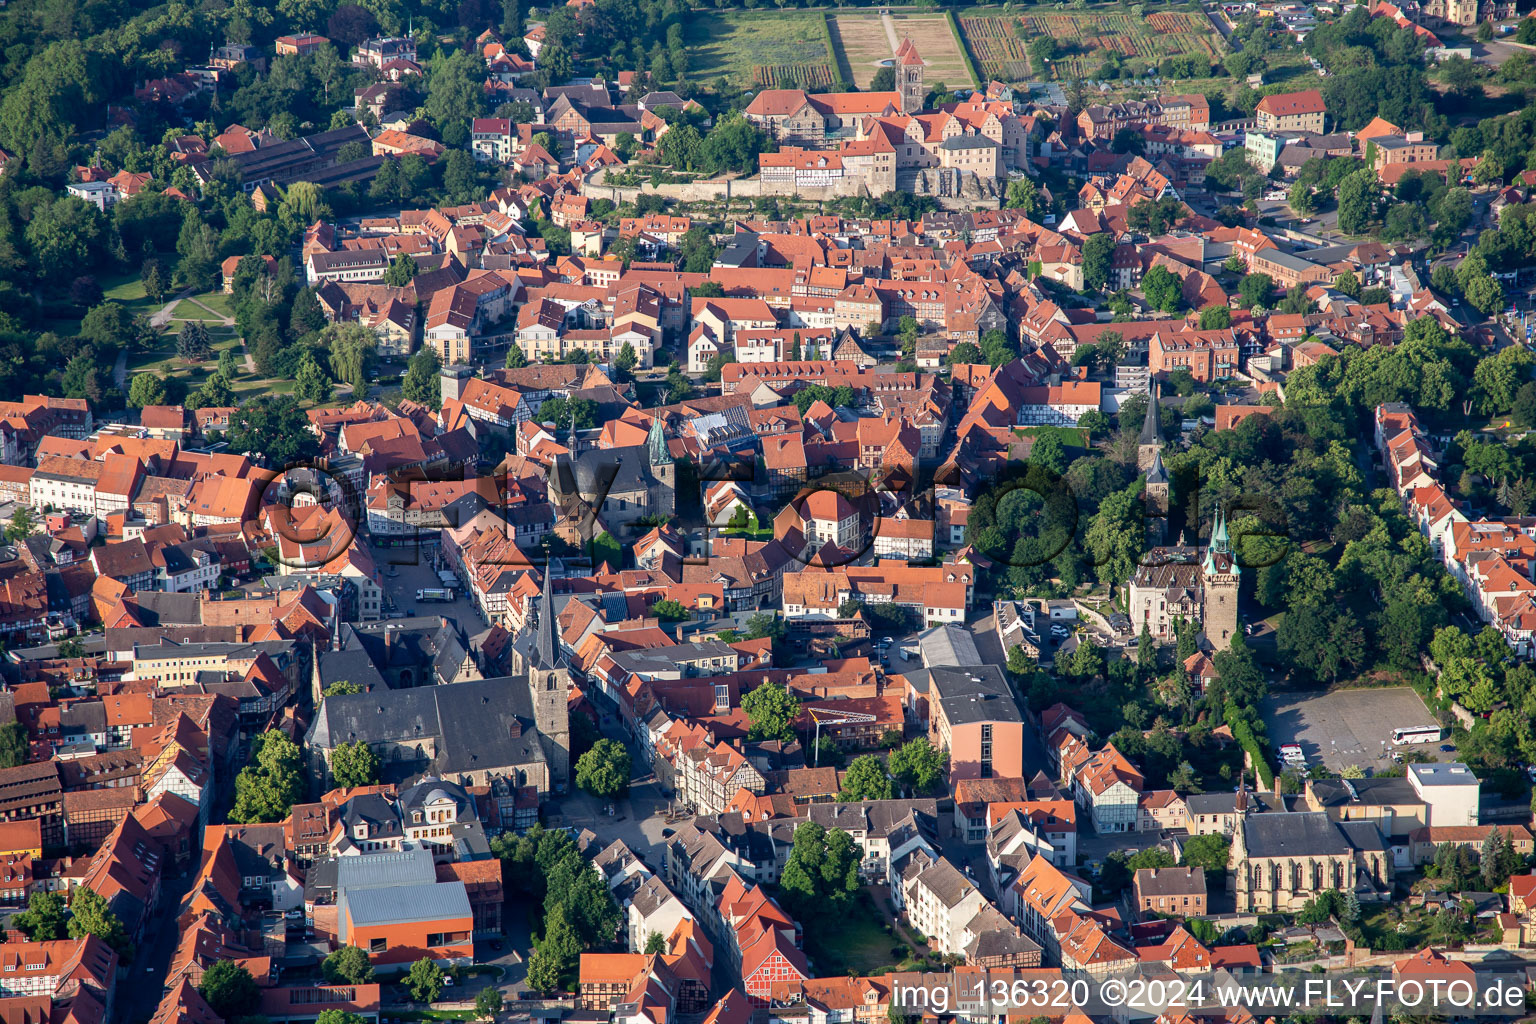 Old town with Burgberg-St. Wiperti-Münzenberg, St. Servatii Collegiate Church and Castle Museum Quedlinburg in Quedlinburg in the state Saxony-Anhalt, Germany